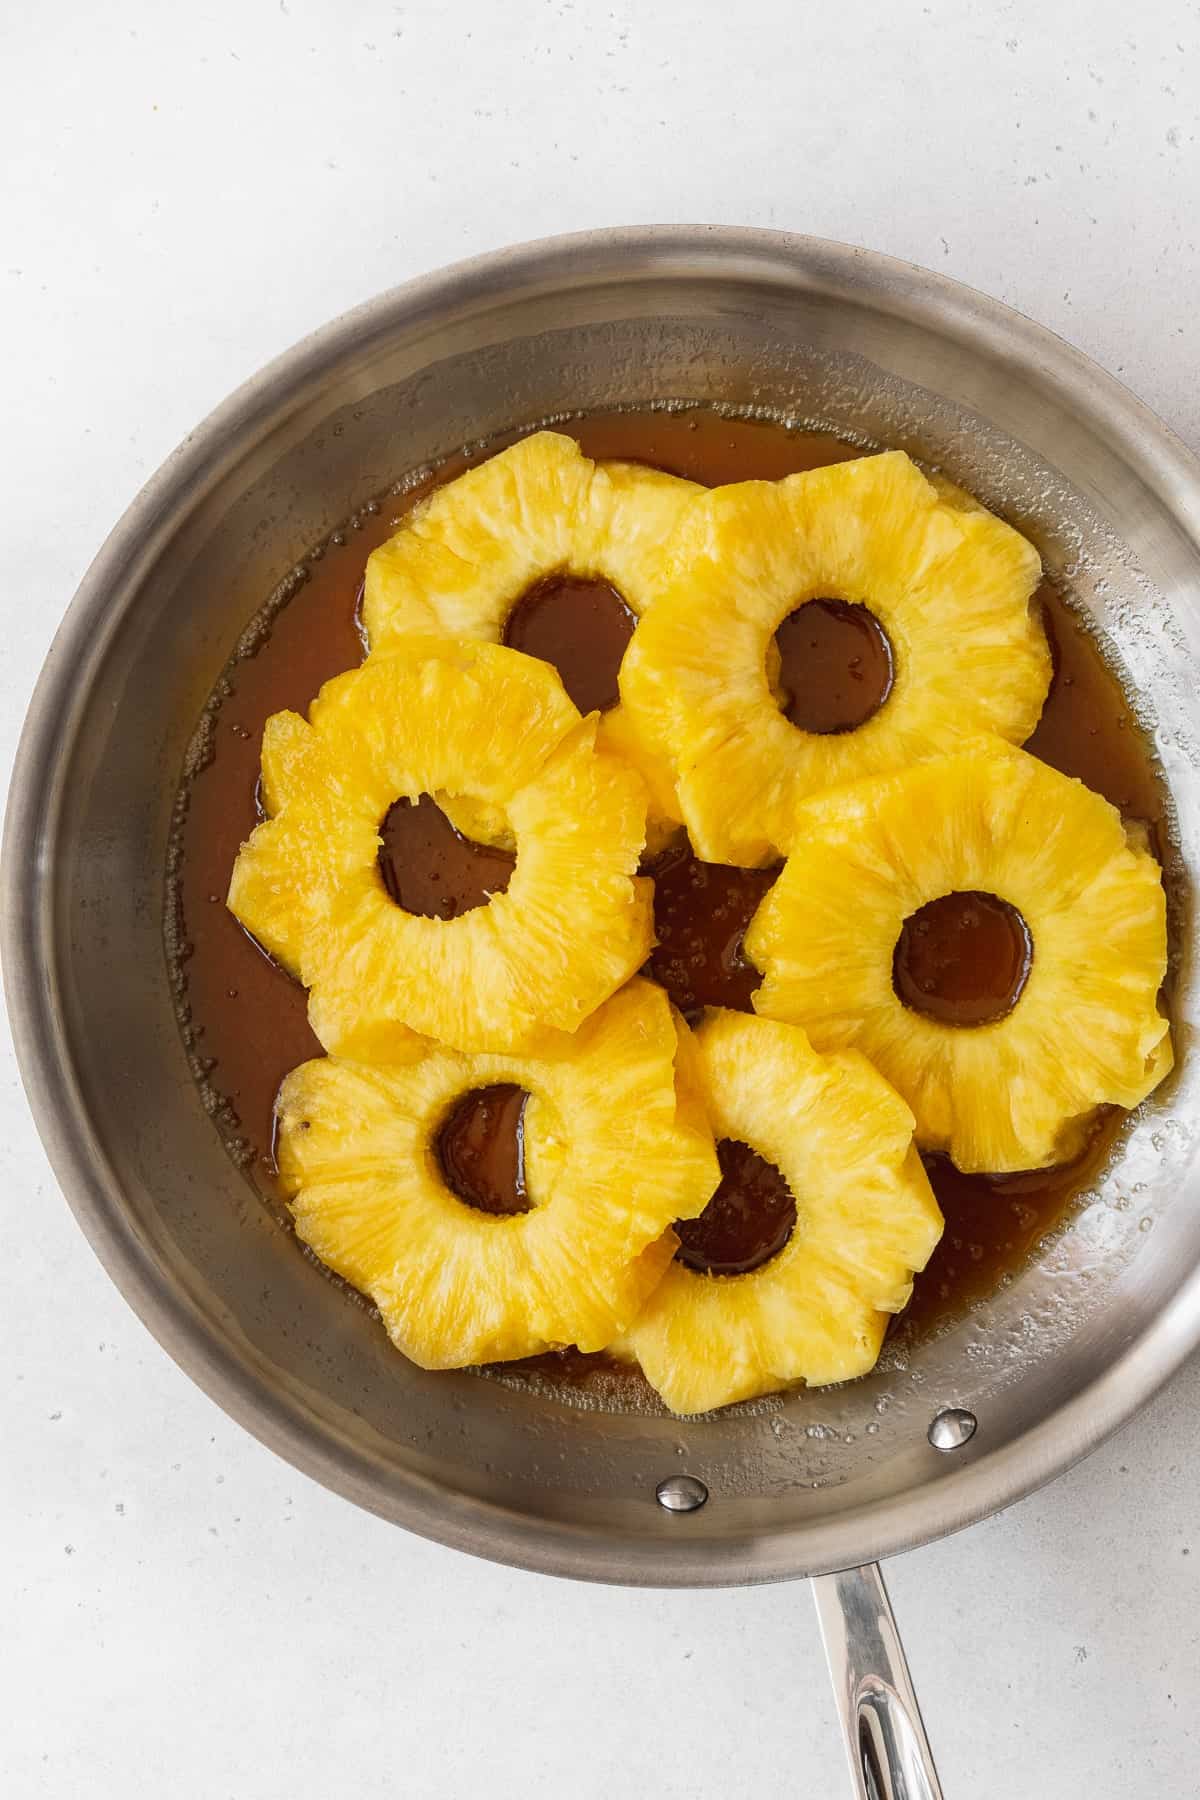 Cooking the brown sugar and pineapple in a skillet.